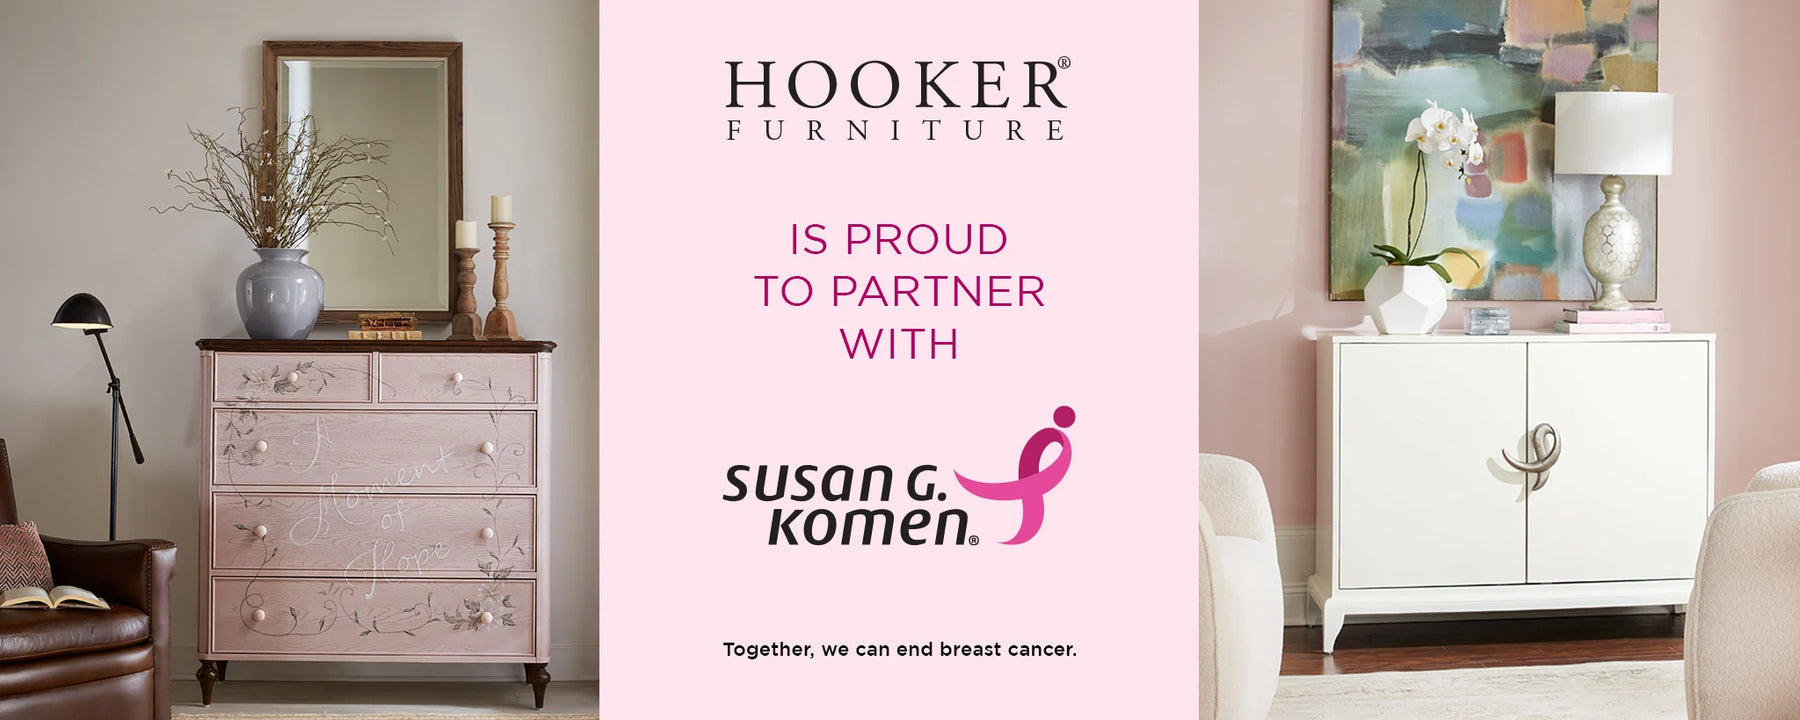 Create Comfort and Support a Cause with Hooker Furniture